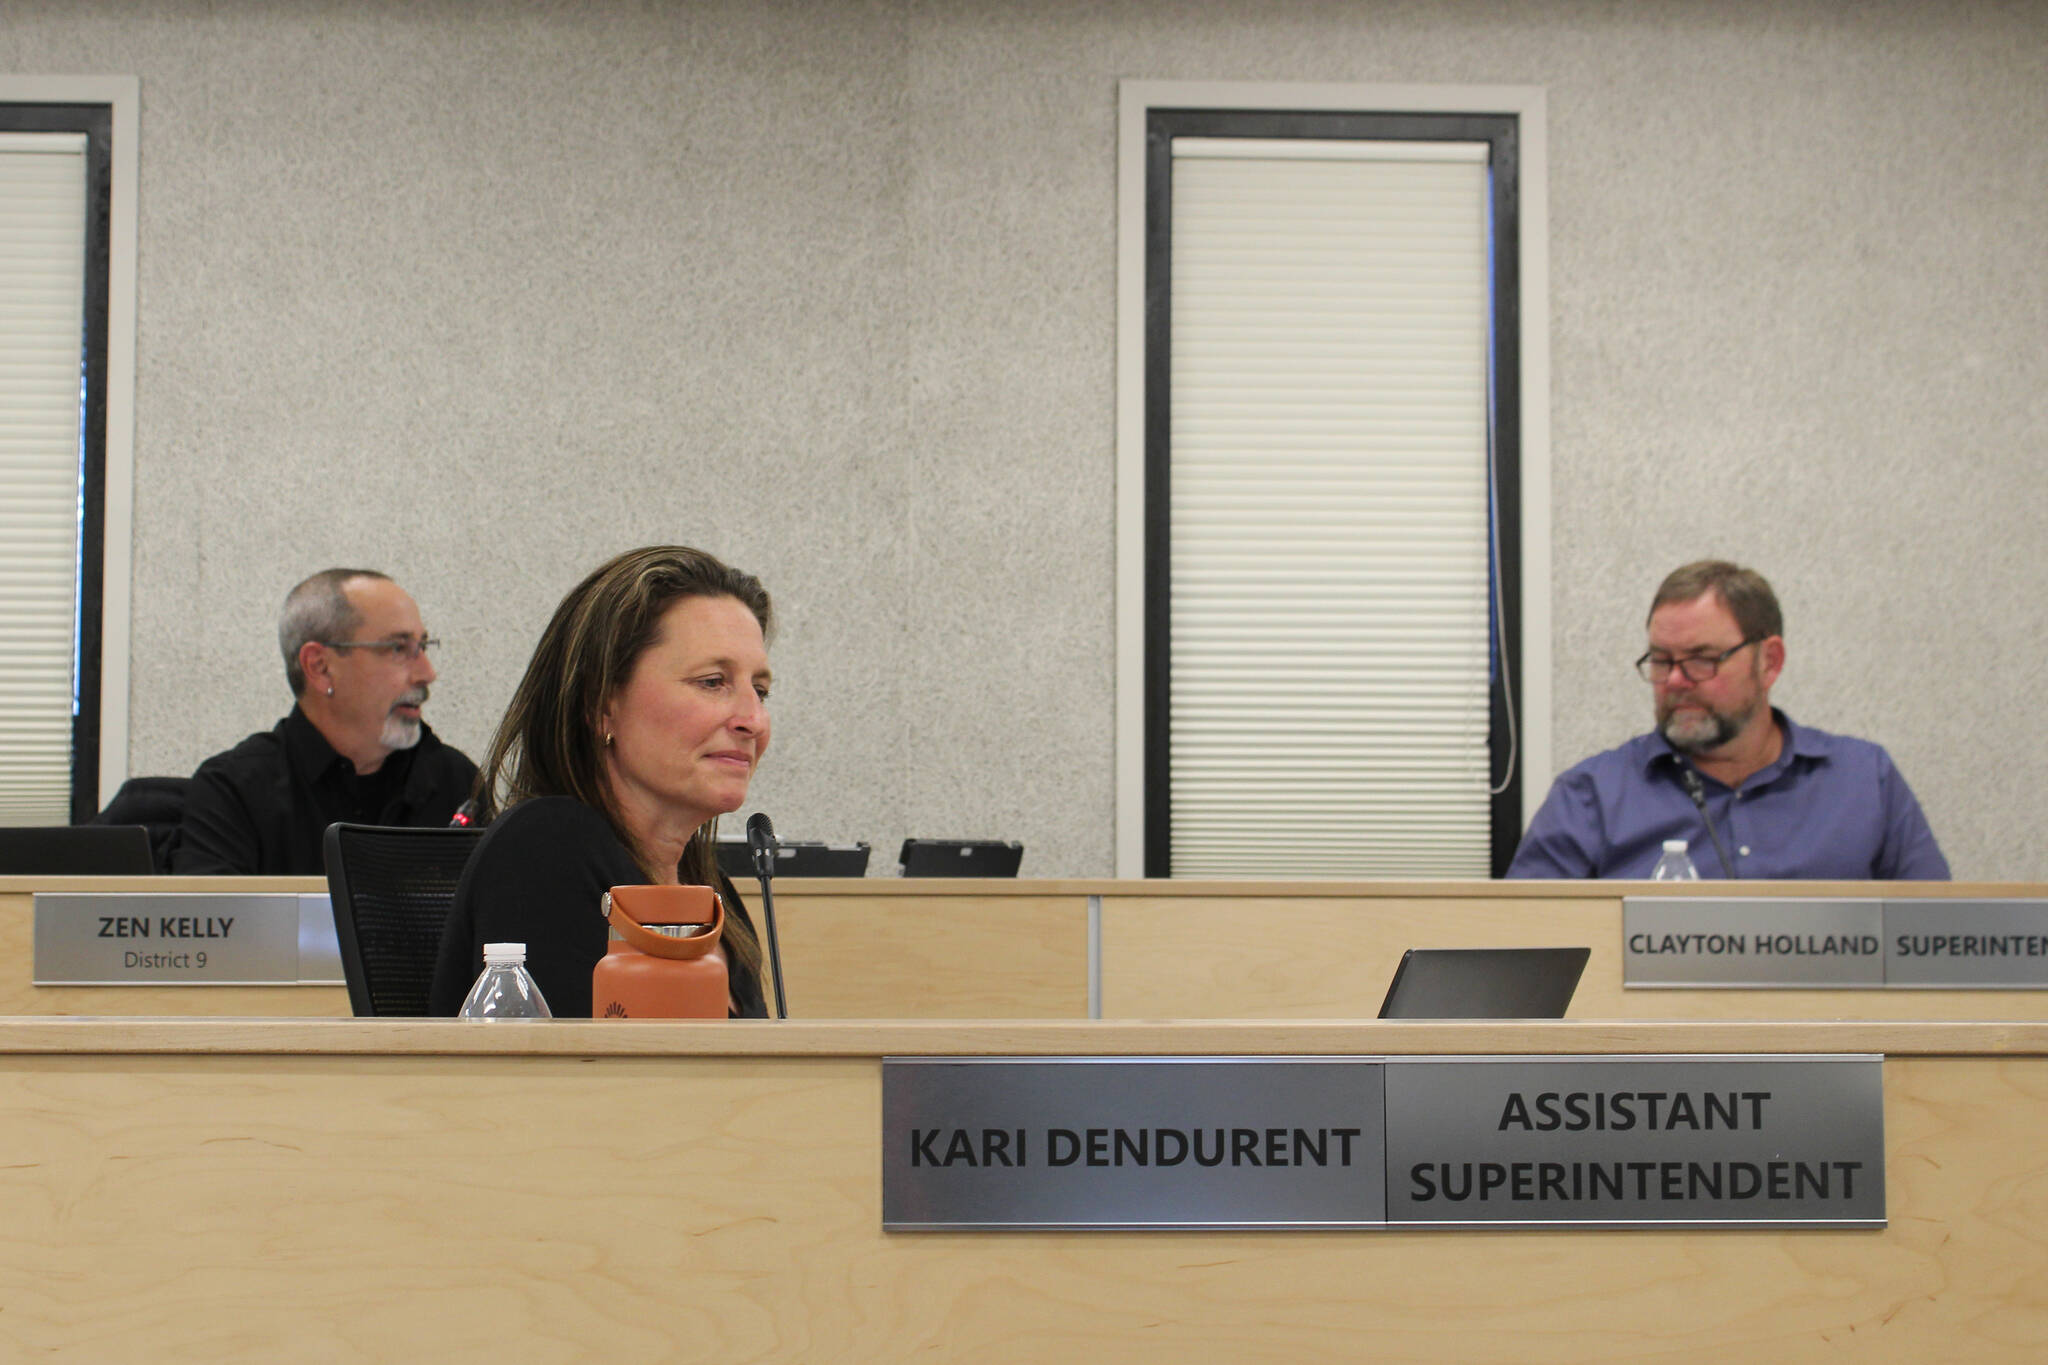 Kenai Peninsula Borough School District Assistant Superintendent Kari Dendurent (front left) and Superintendent Clayton Holland (back right) listen as Board of Education President Zen Kelly (back left) speaks at a board meeting on Monday in Soldotna. (Ashlyn O’Hara/Peninsula Clarion)